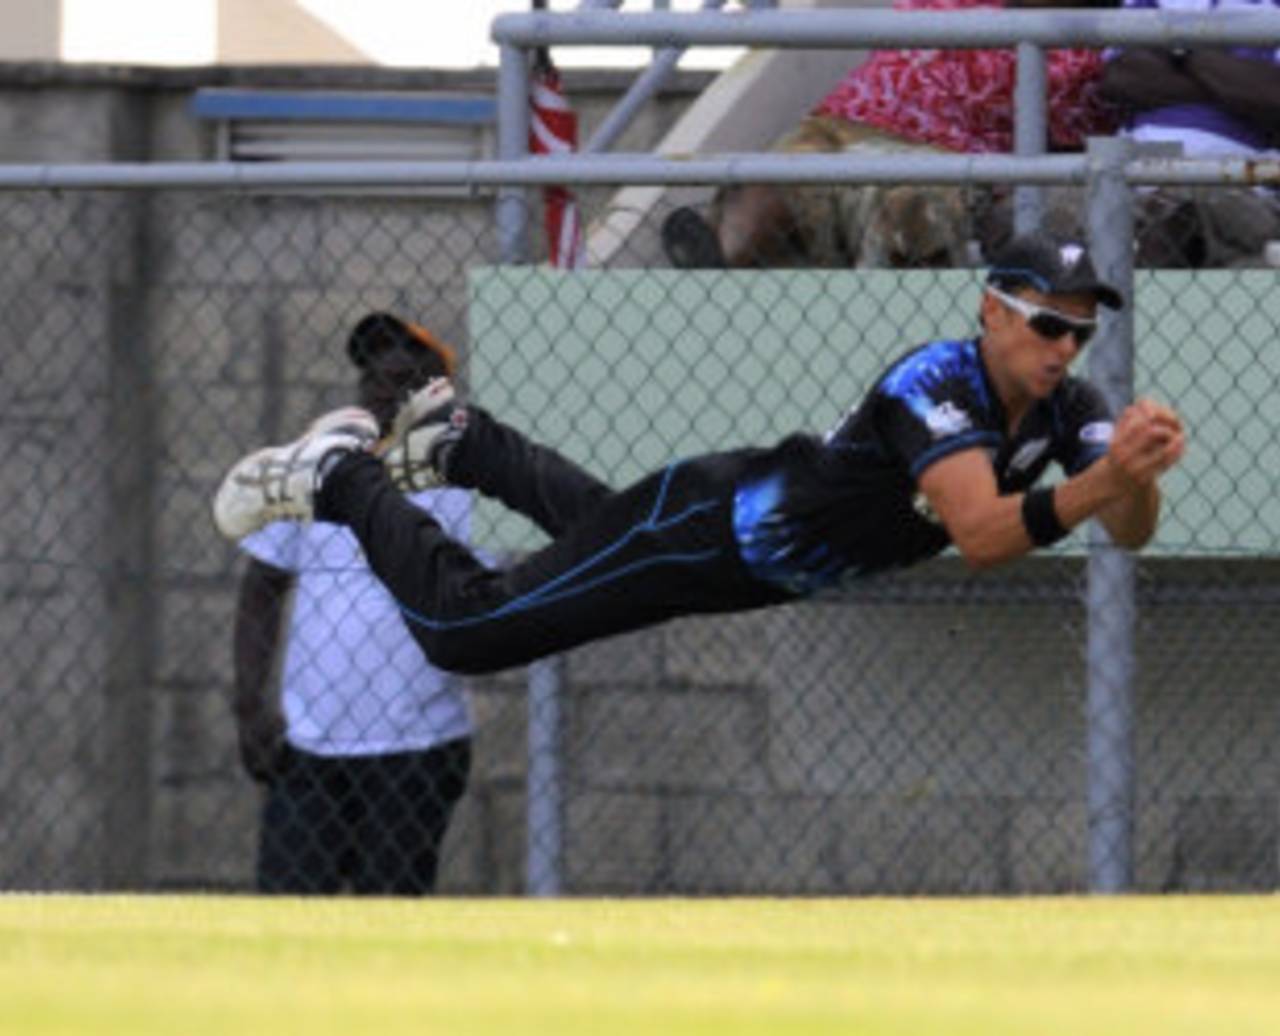 Trent Boult goes airborne to complete a stunning catch, West Indies v New Zealand, 2nd T20I, Dominica, July 6, 2014